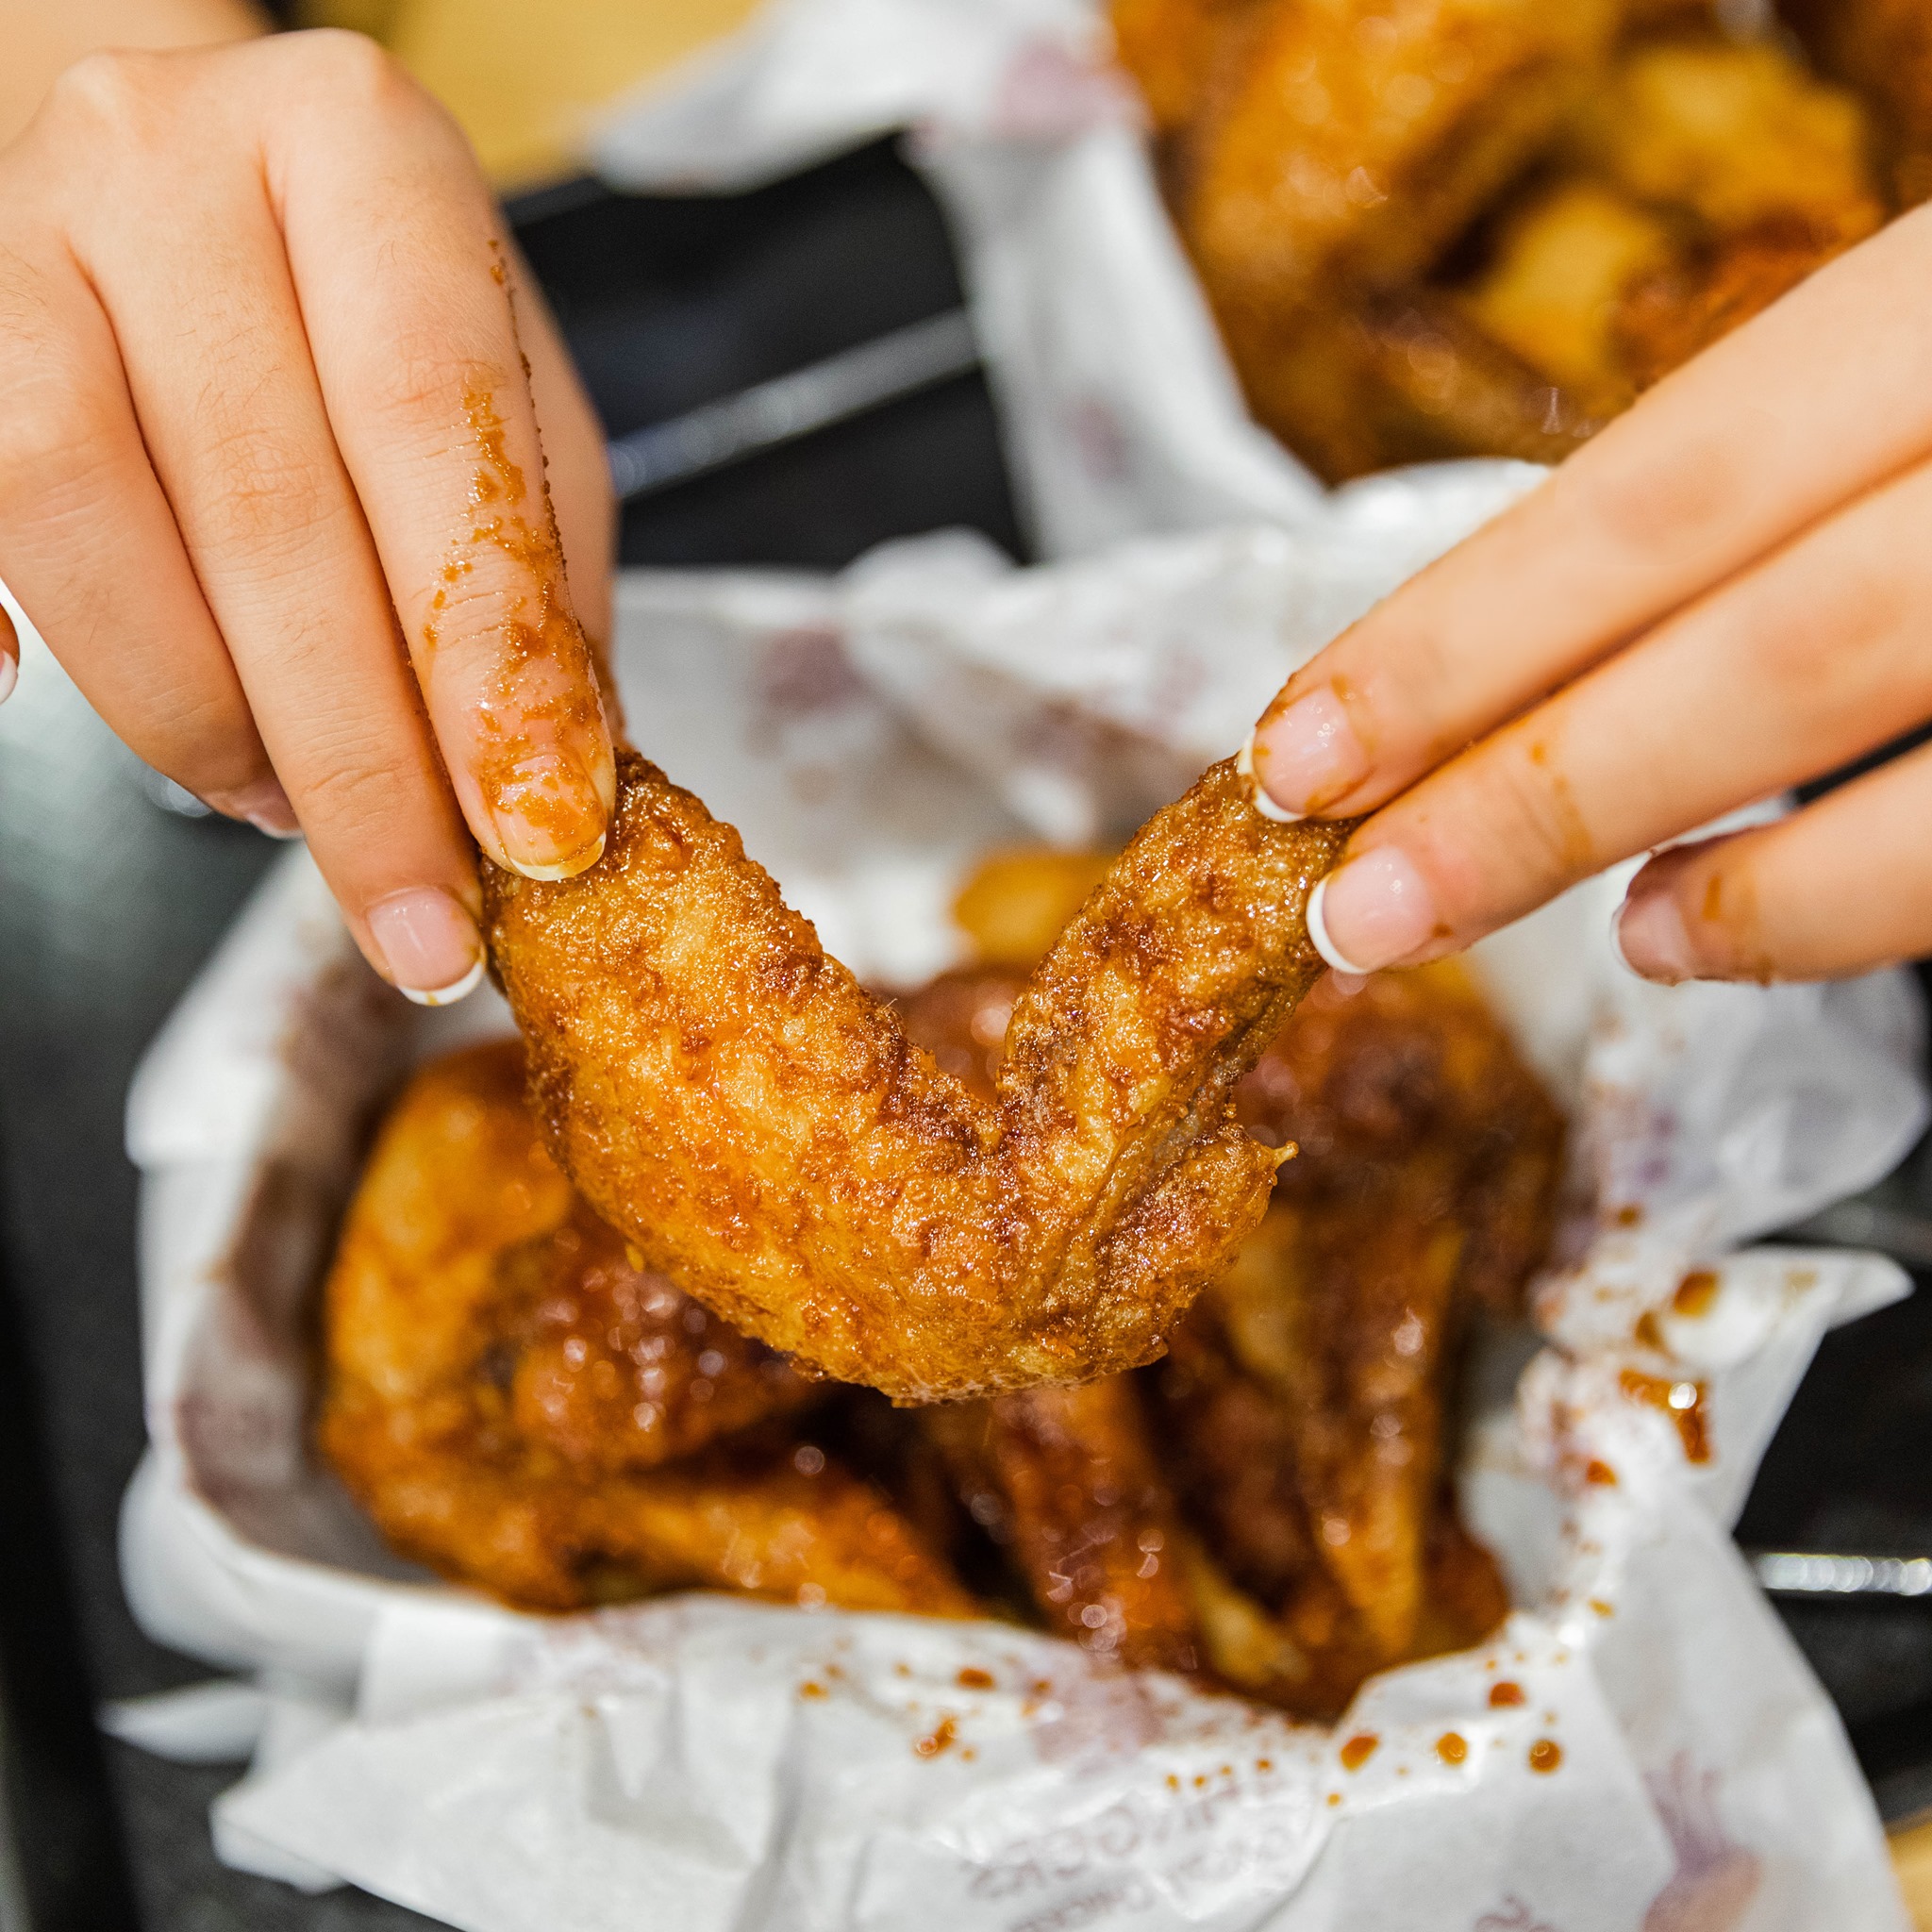 Manicured hands getting saucy while eating wings.